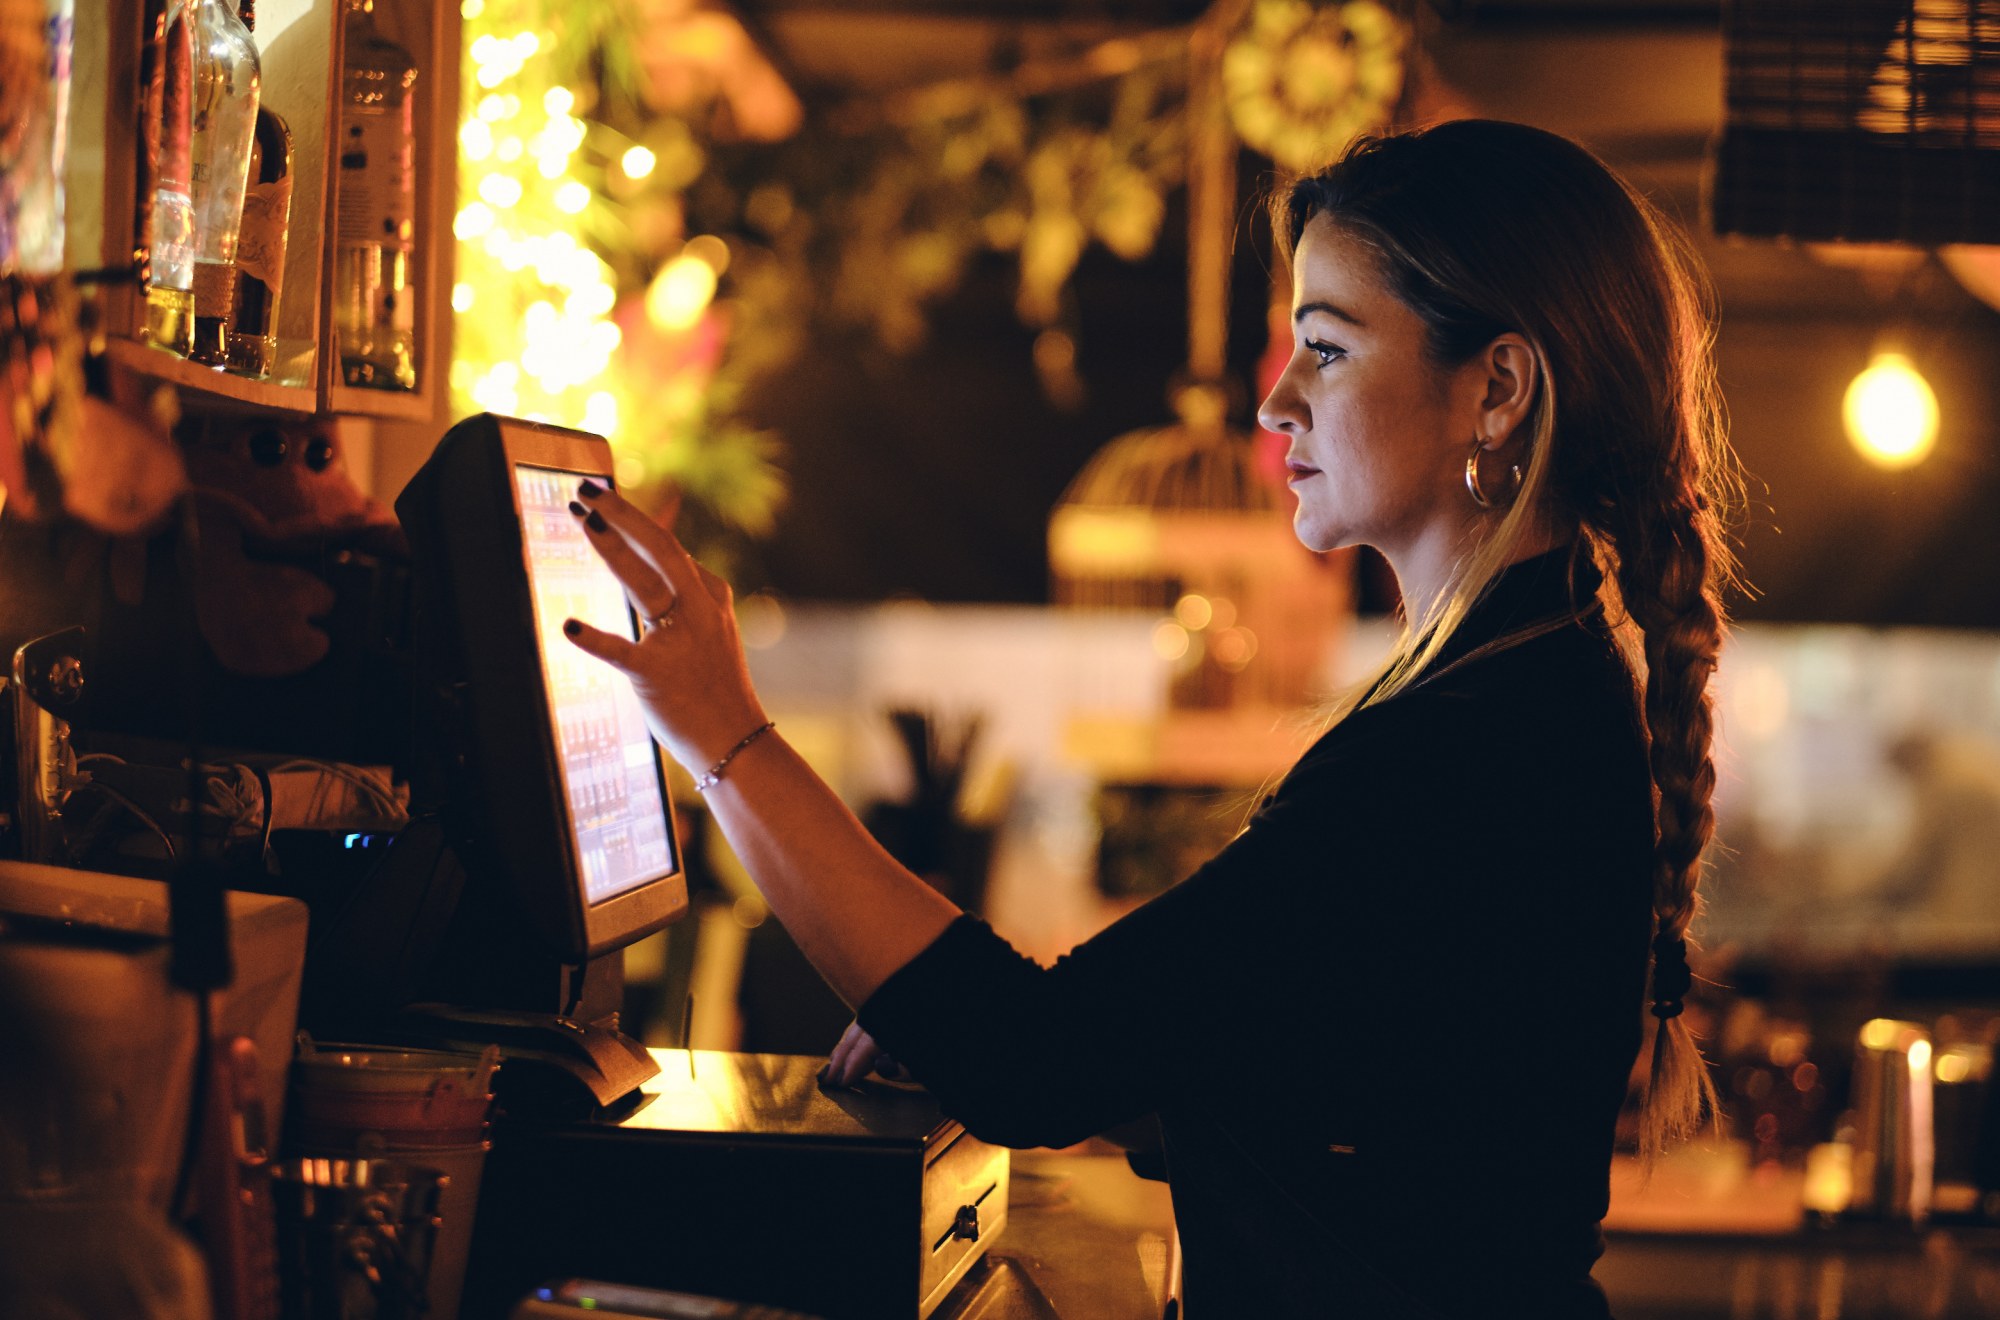 young waitress at a bar entering an order into the pos system